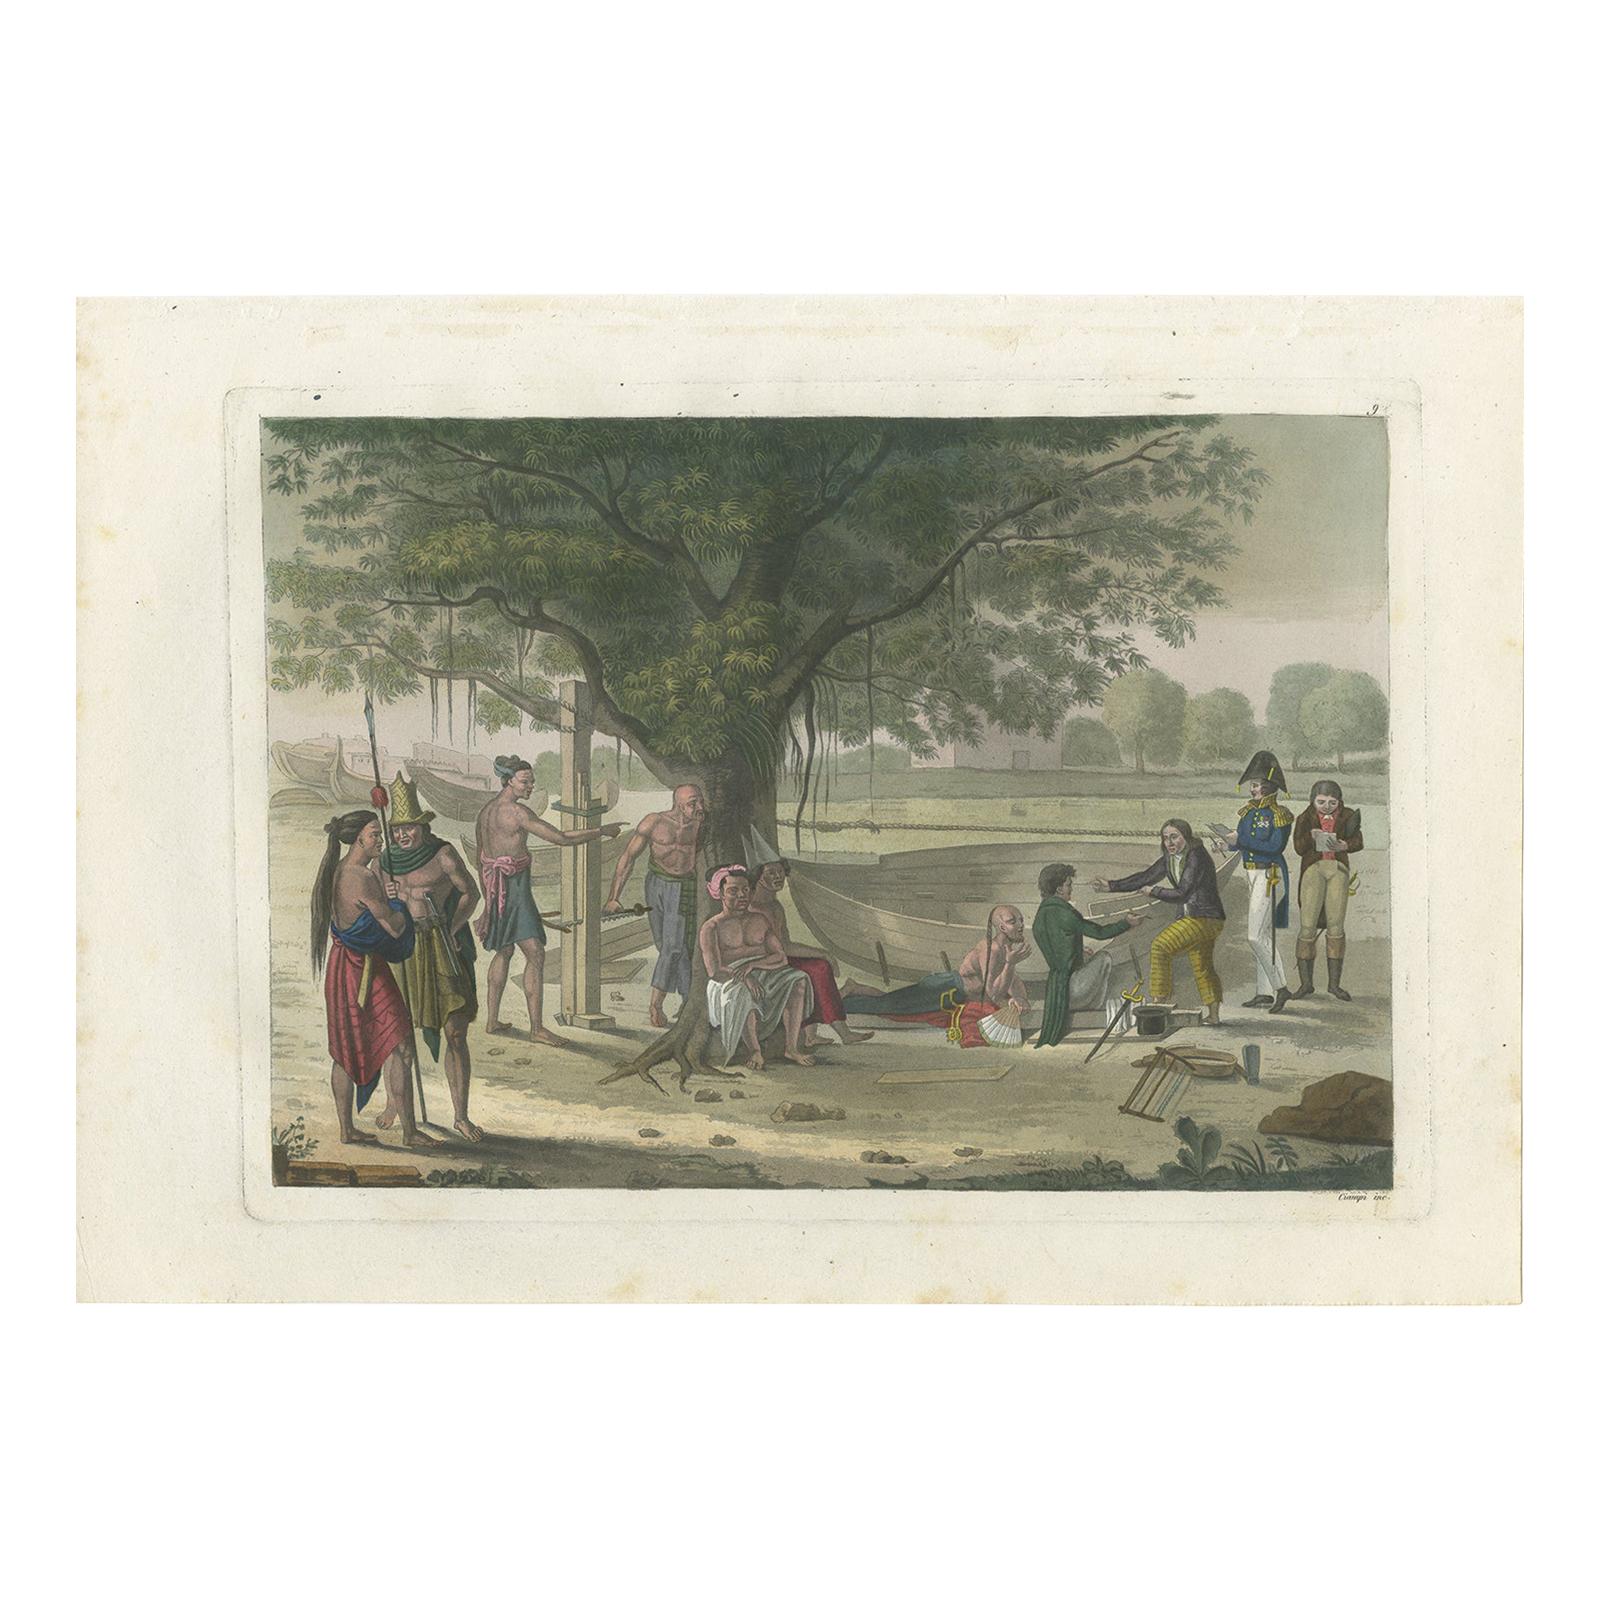 Antique Print of a Construction Site on Timor Island by Ferrario '1831'